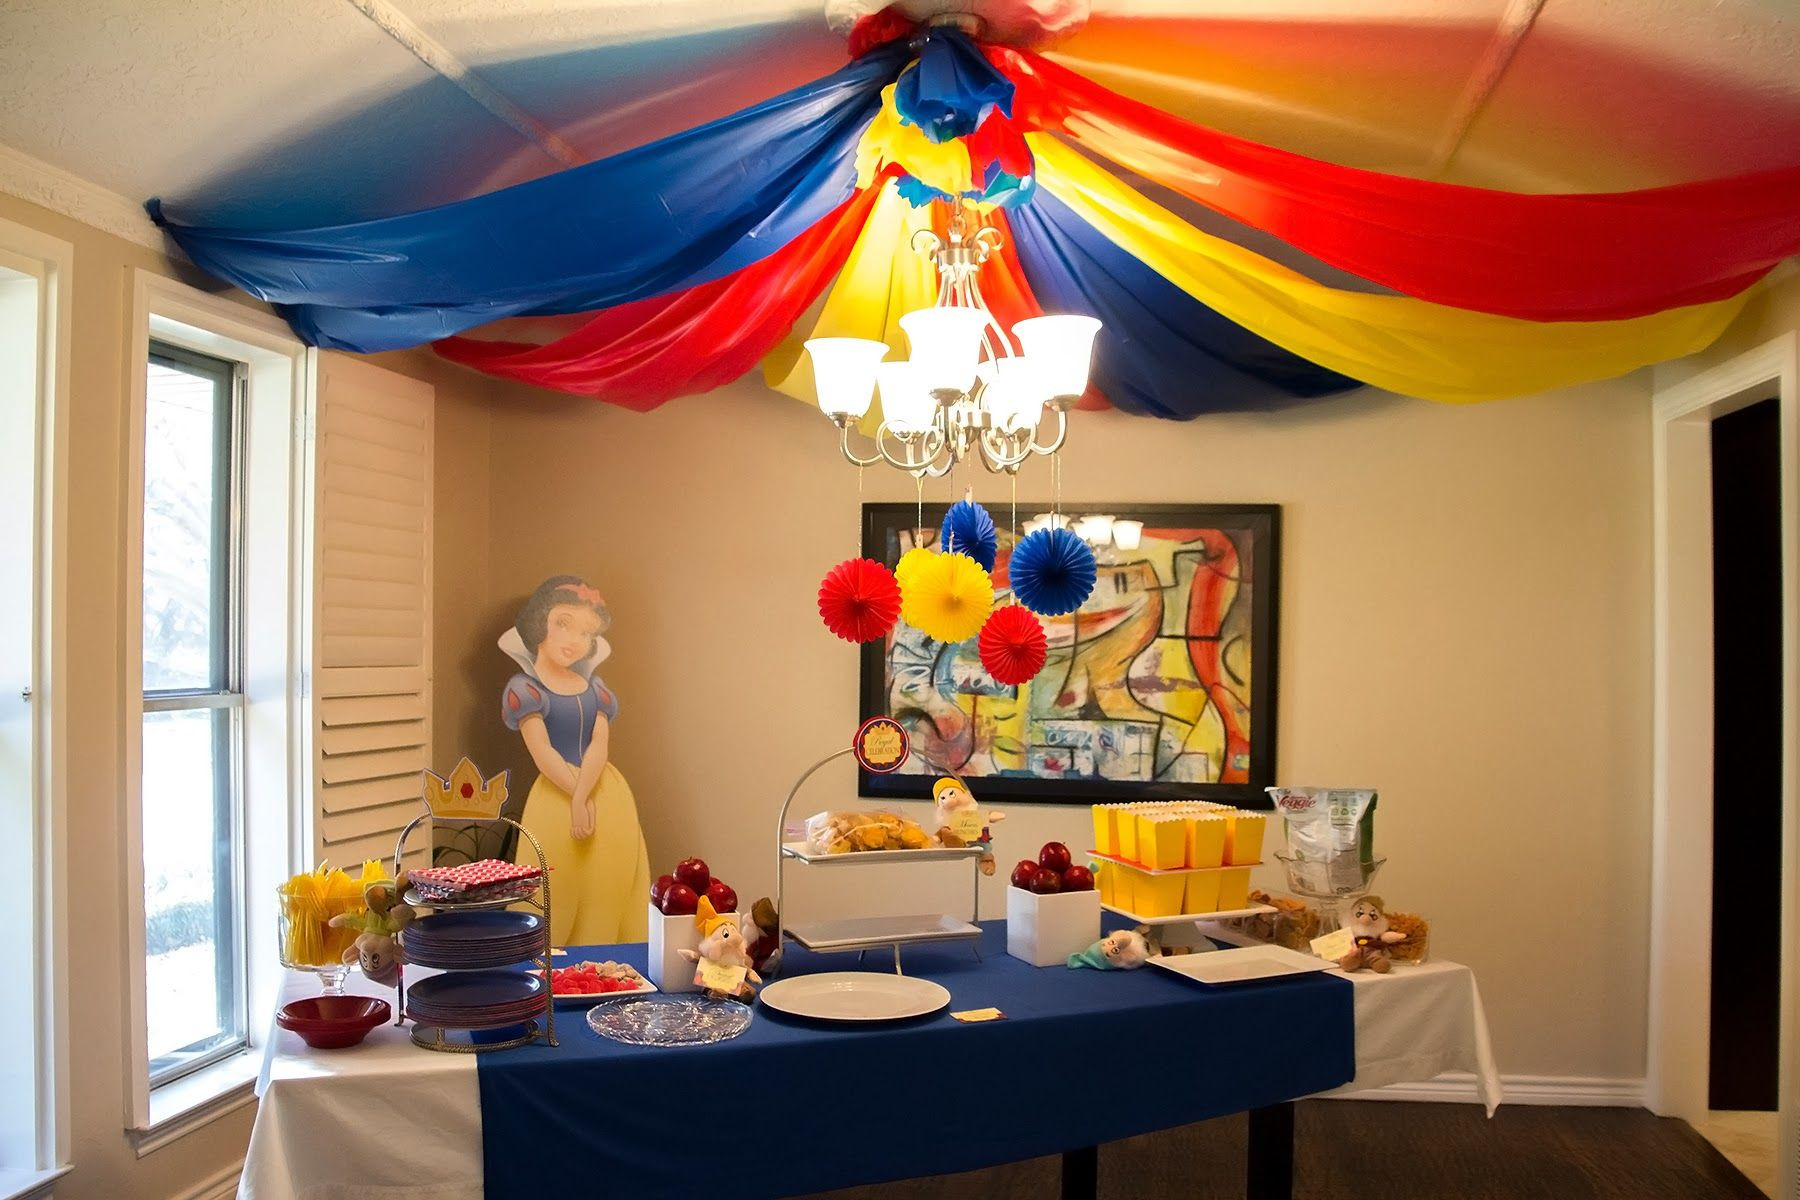 Snow White Birthday Party Decorations
 Snow White themed first birthday party